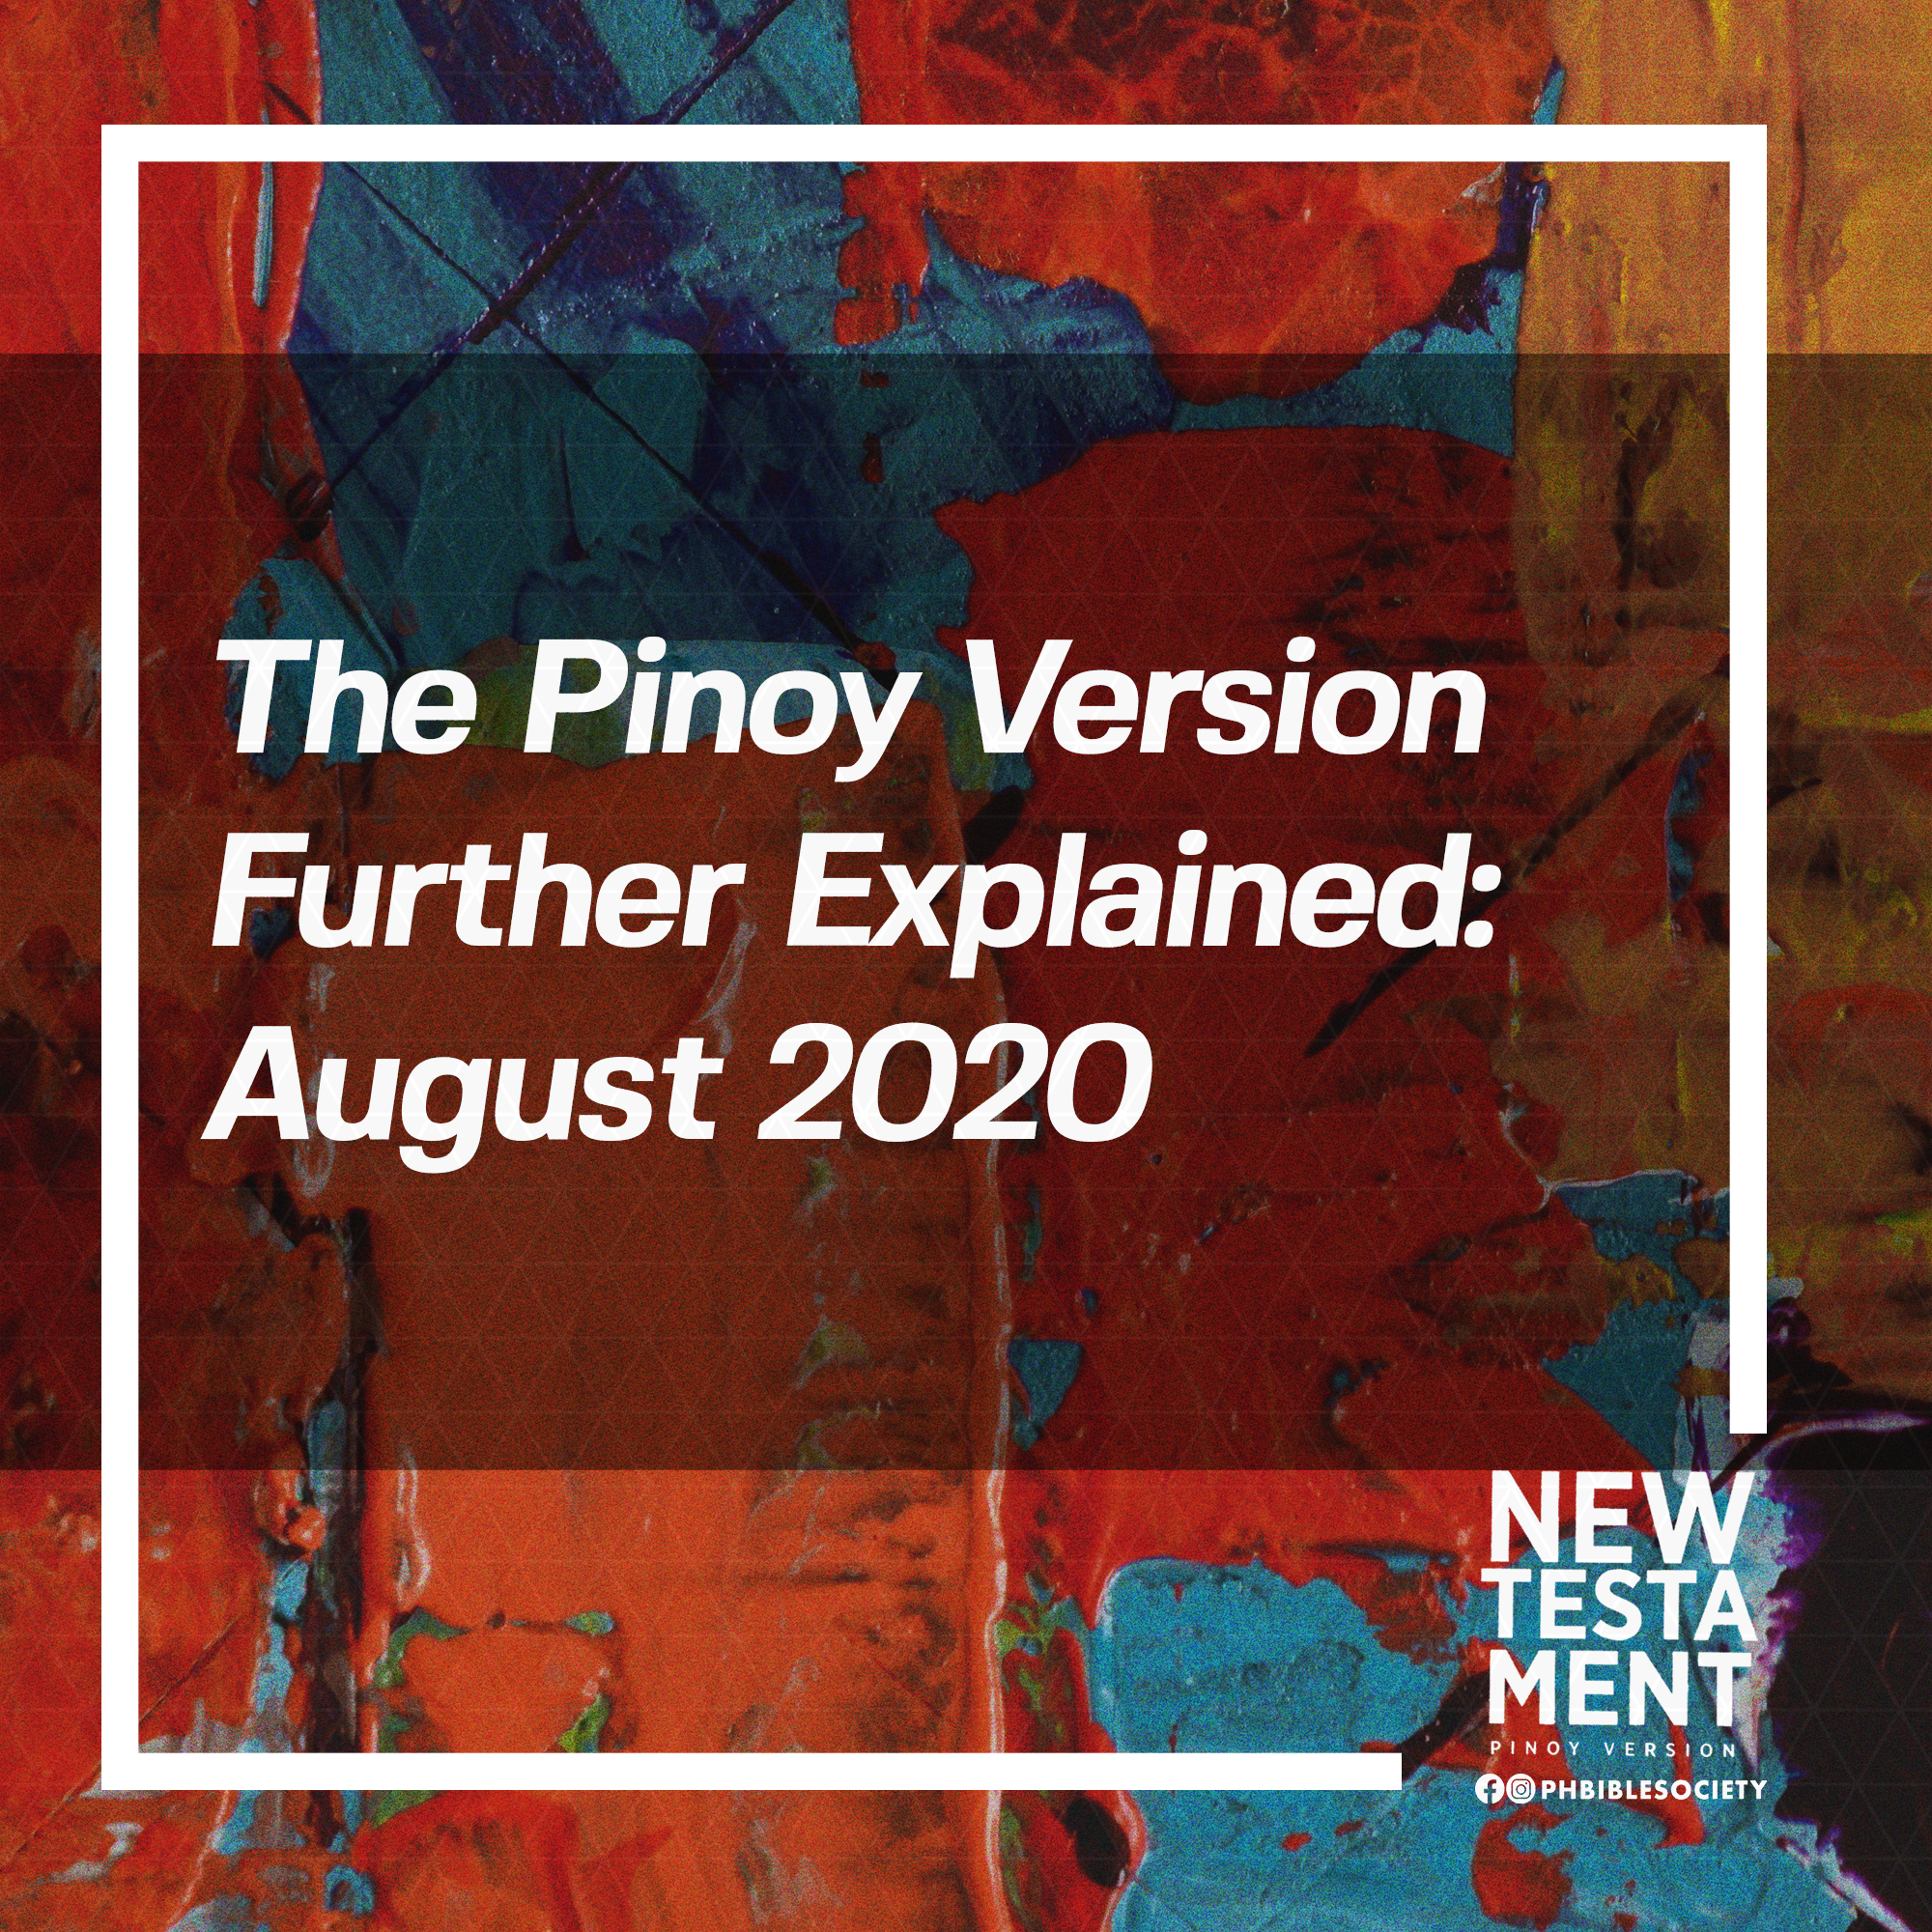 The Pinoy Version Further Explained: August 2020[1]